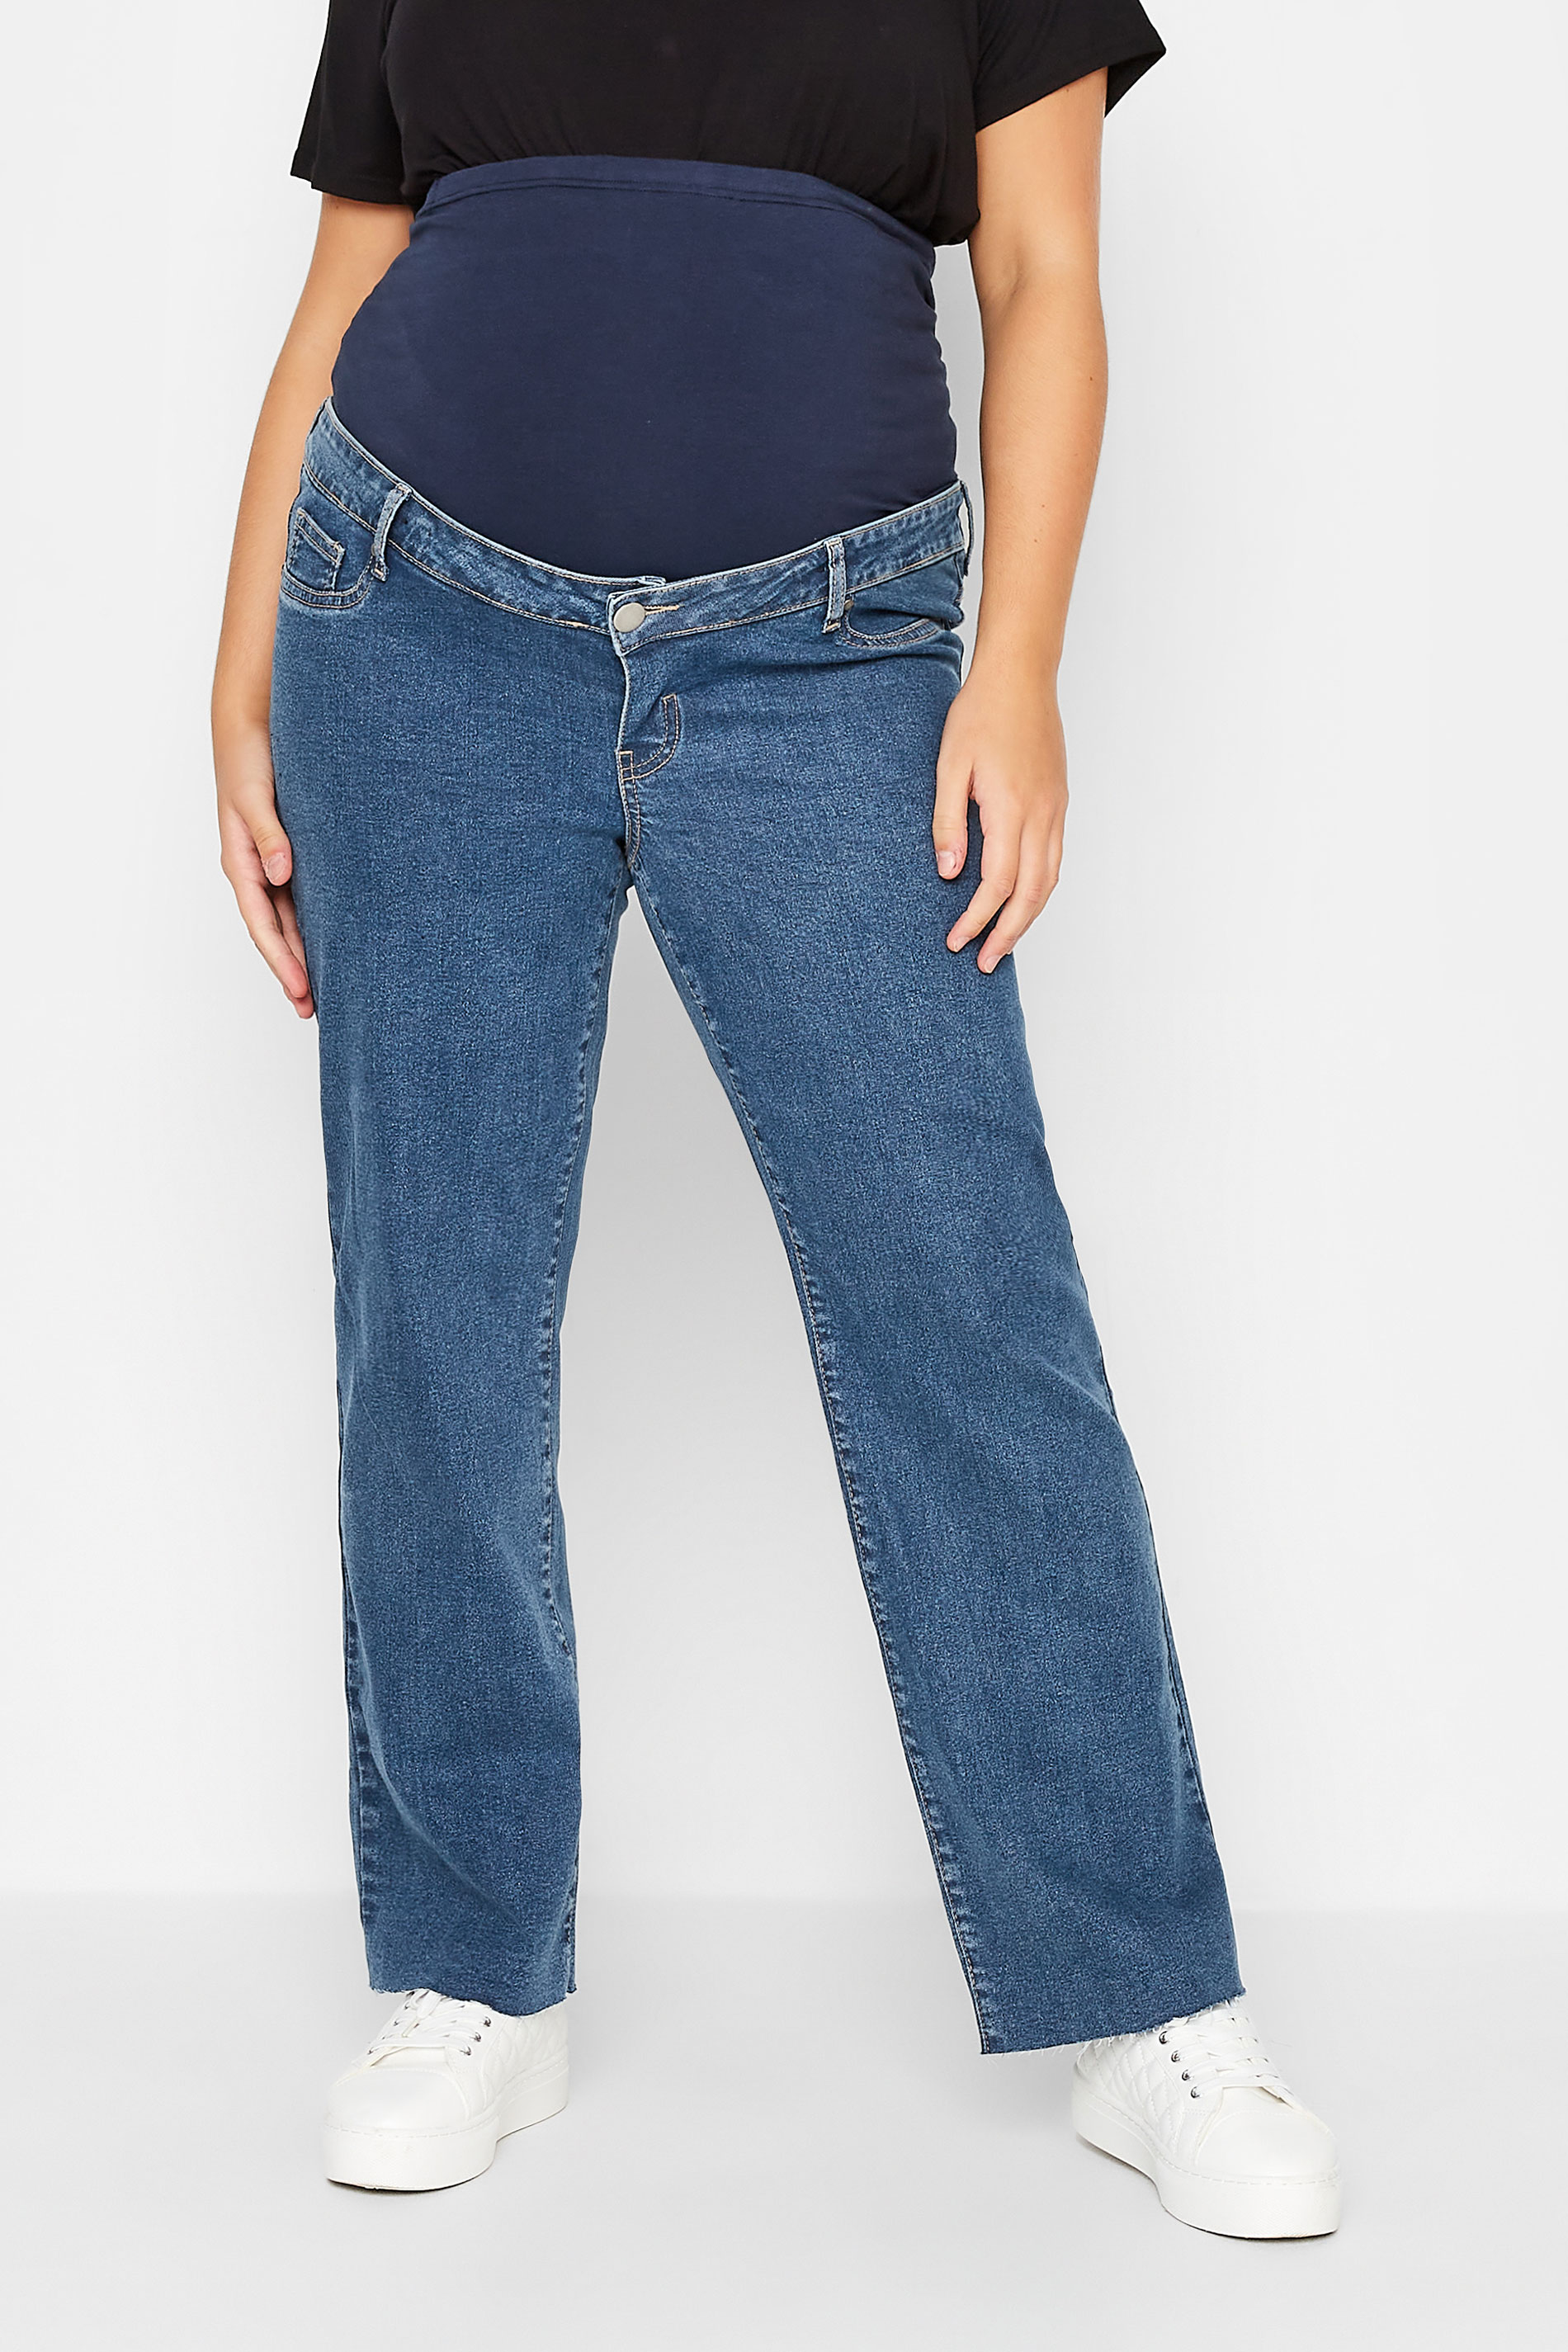 BUMP IT UP MATERNITY Plus Size Mid Blue Wide Leg Jeans | Yours Clothing 1